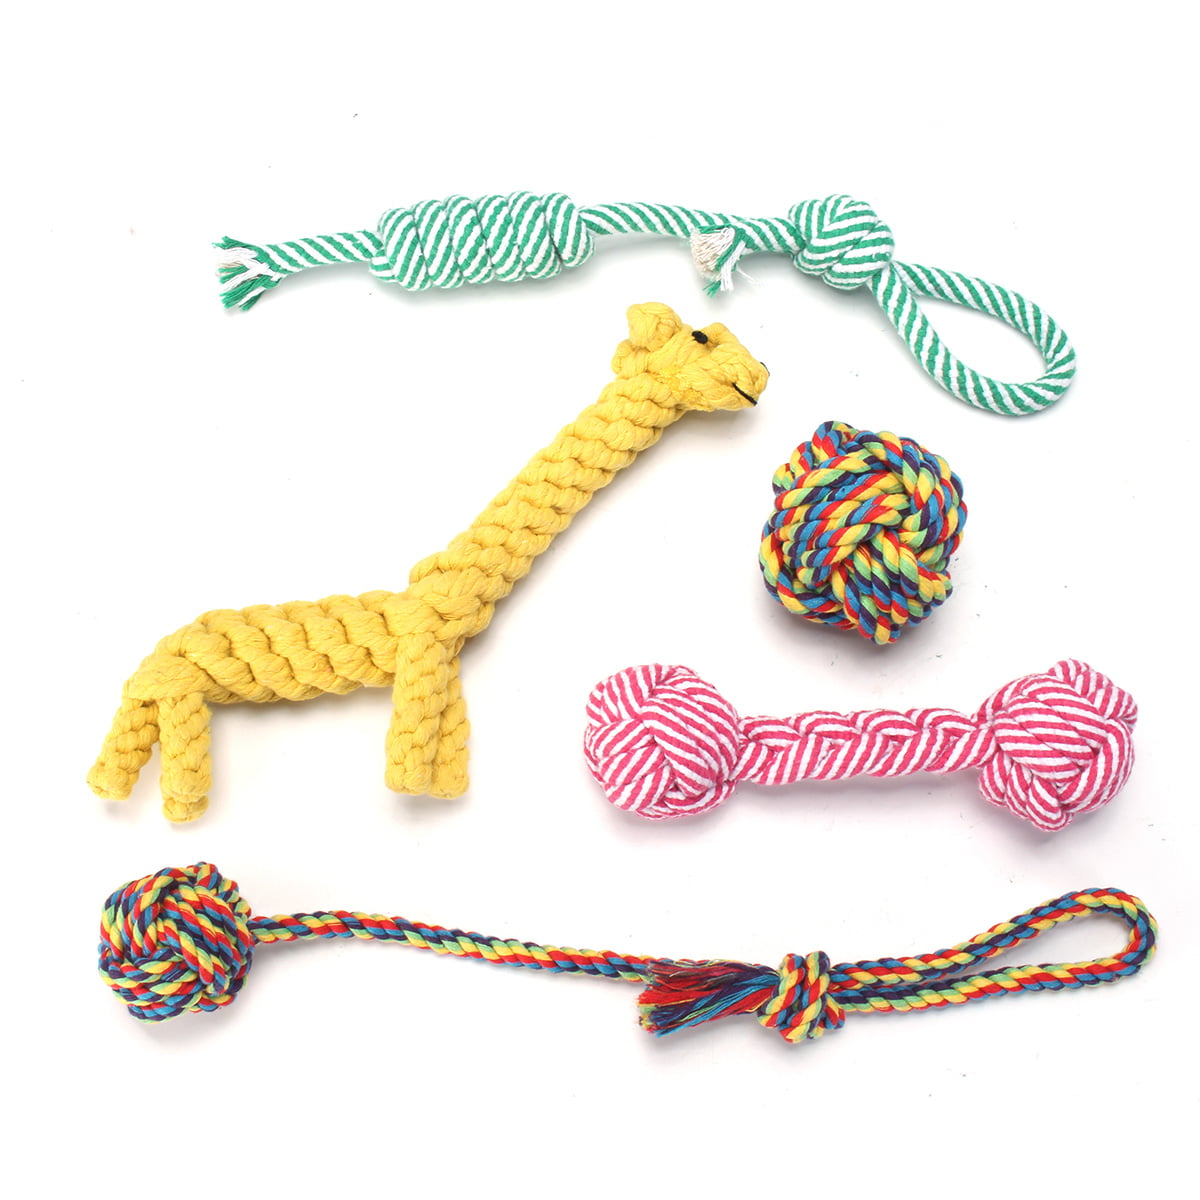 Medium and Adult Dogs for Teeth Cleaning and Dental Disease Prevention Chew Rope Toys Set 10 Pcs Dog Puppy Molar Toys Natural Non-toxic Cotton Reinforced Durable Interactive Chewing Toys for Small